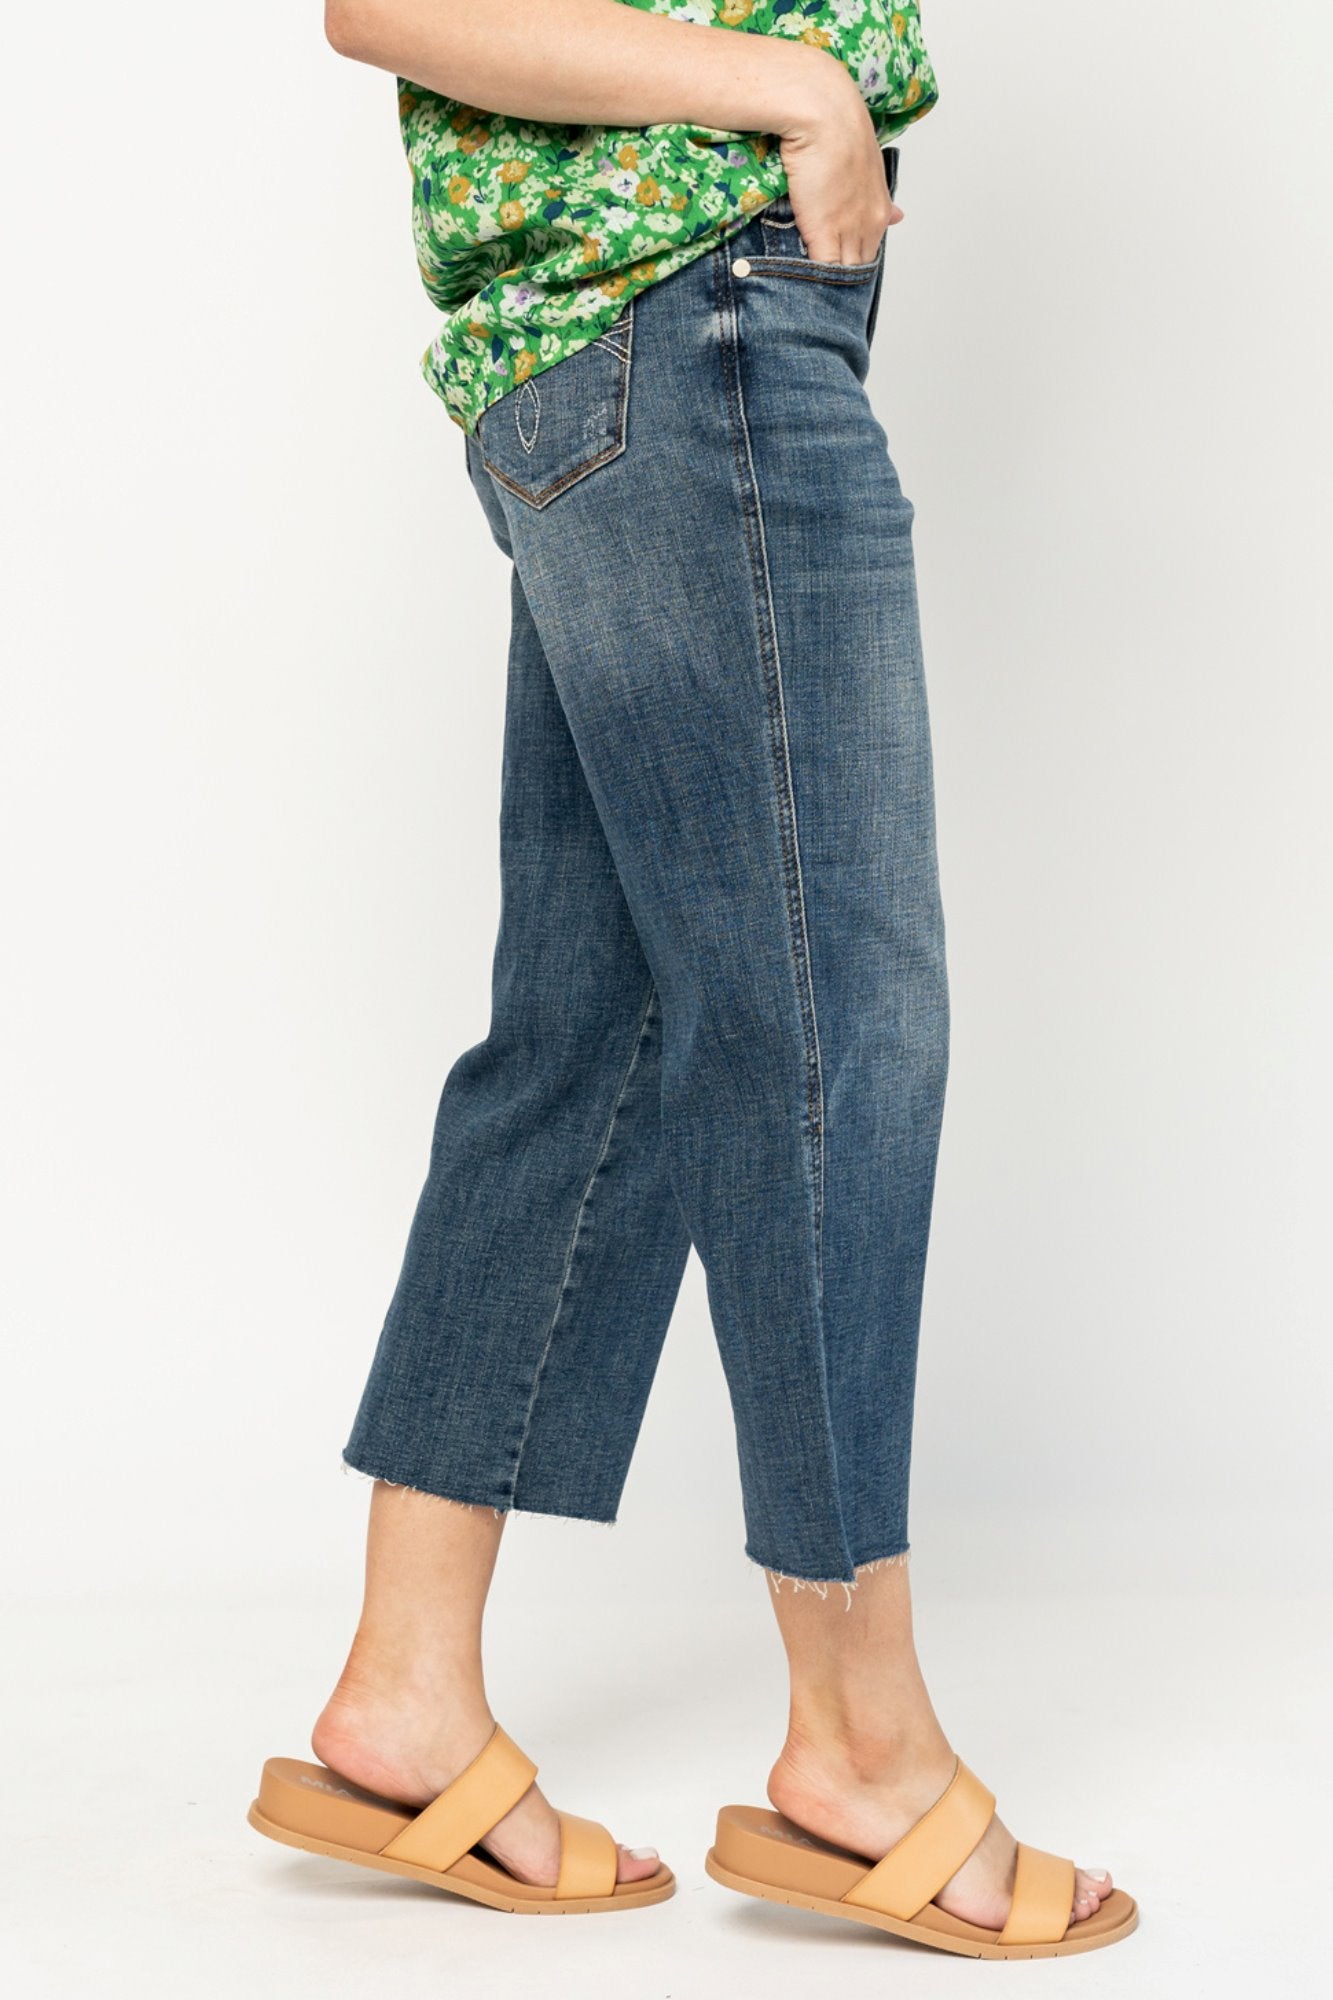 Kendra Jeans Holley Girl 